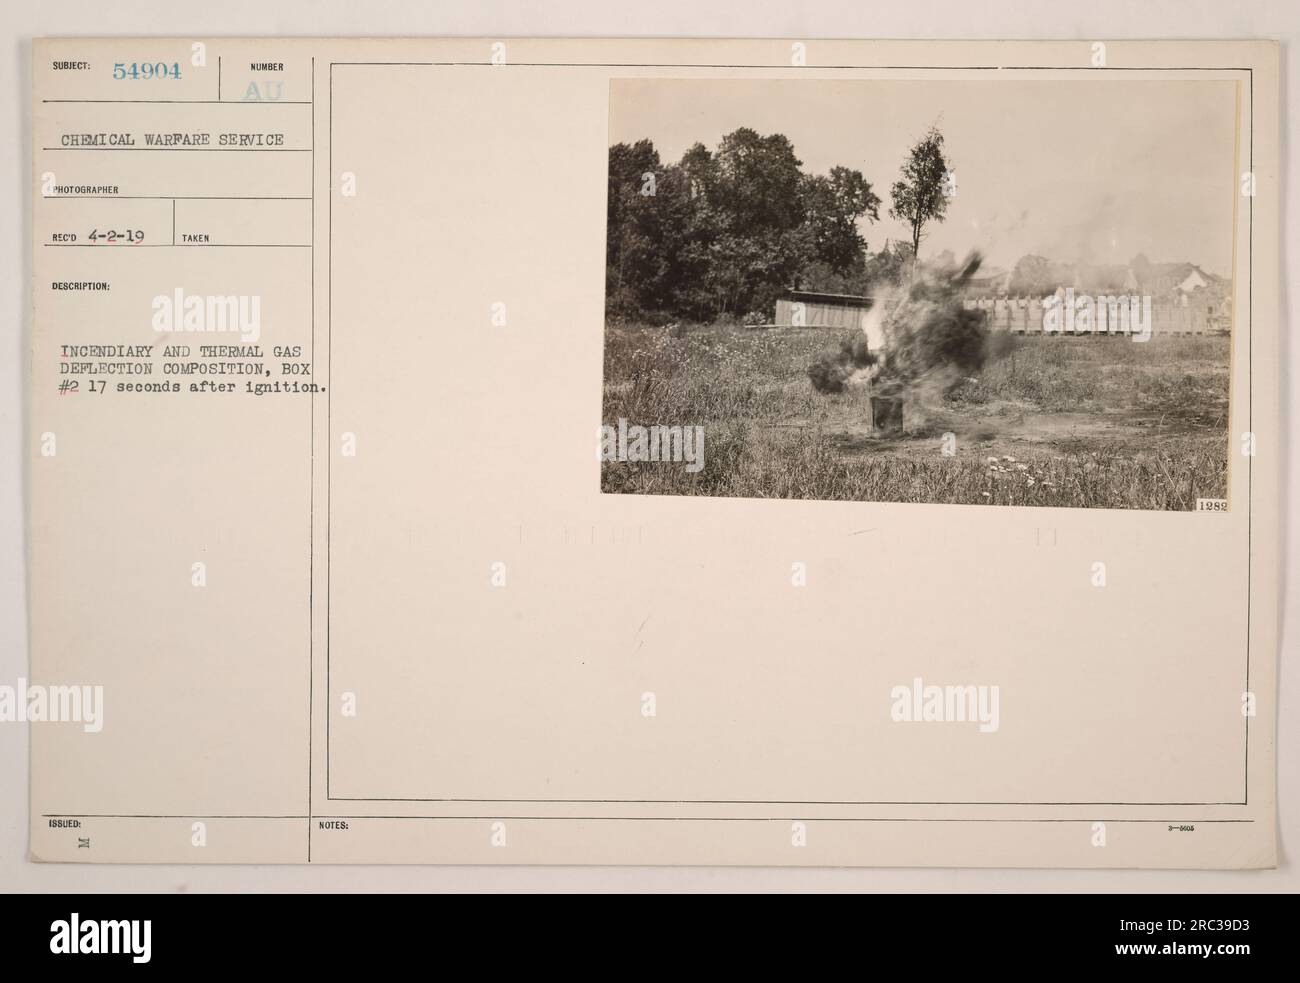 Image showing an incendiary and thermal gas deflection composition, specifically box #2, taken 17 seconds after ignition. The photograph was captured by Chemical Warfare Service photographer Reed on April 2, 1919. The image is part of a collection from American military activities during World War I. Photograph description and issued notes were provided in 1989. Stock Photo